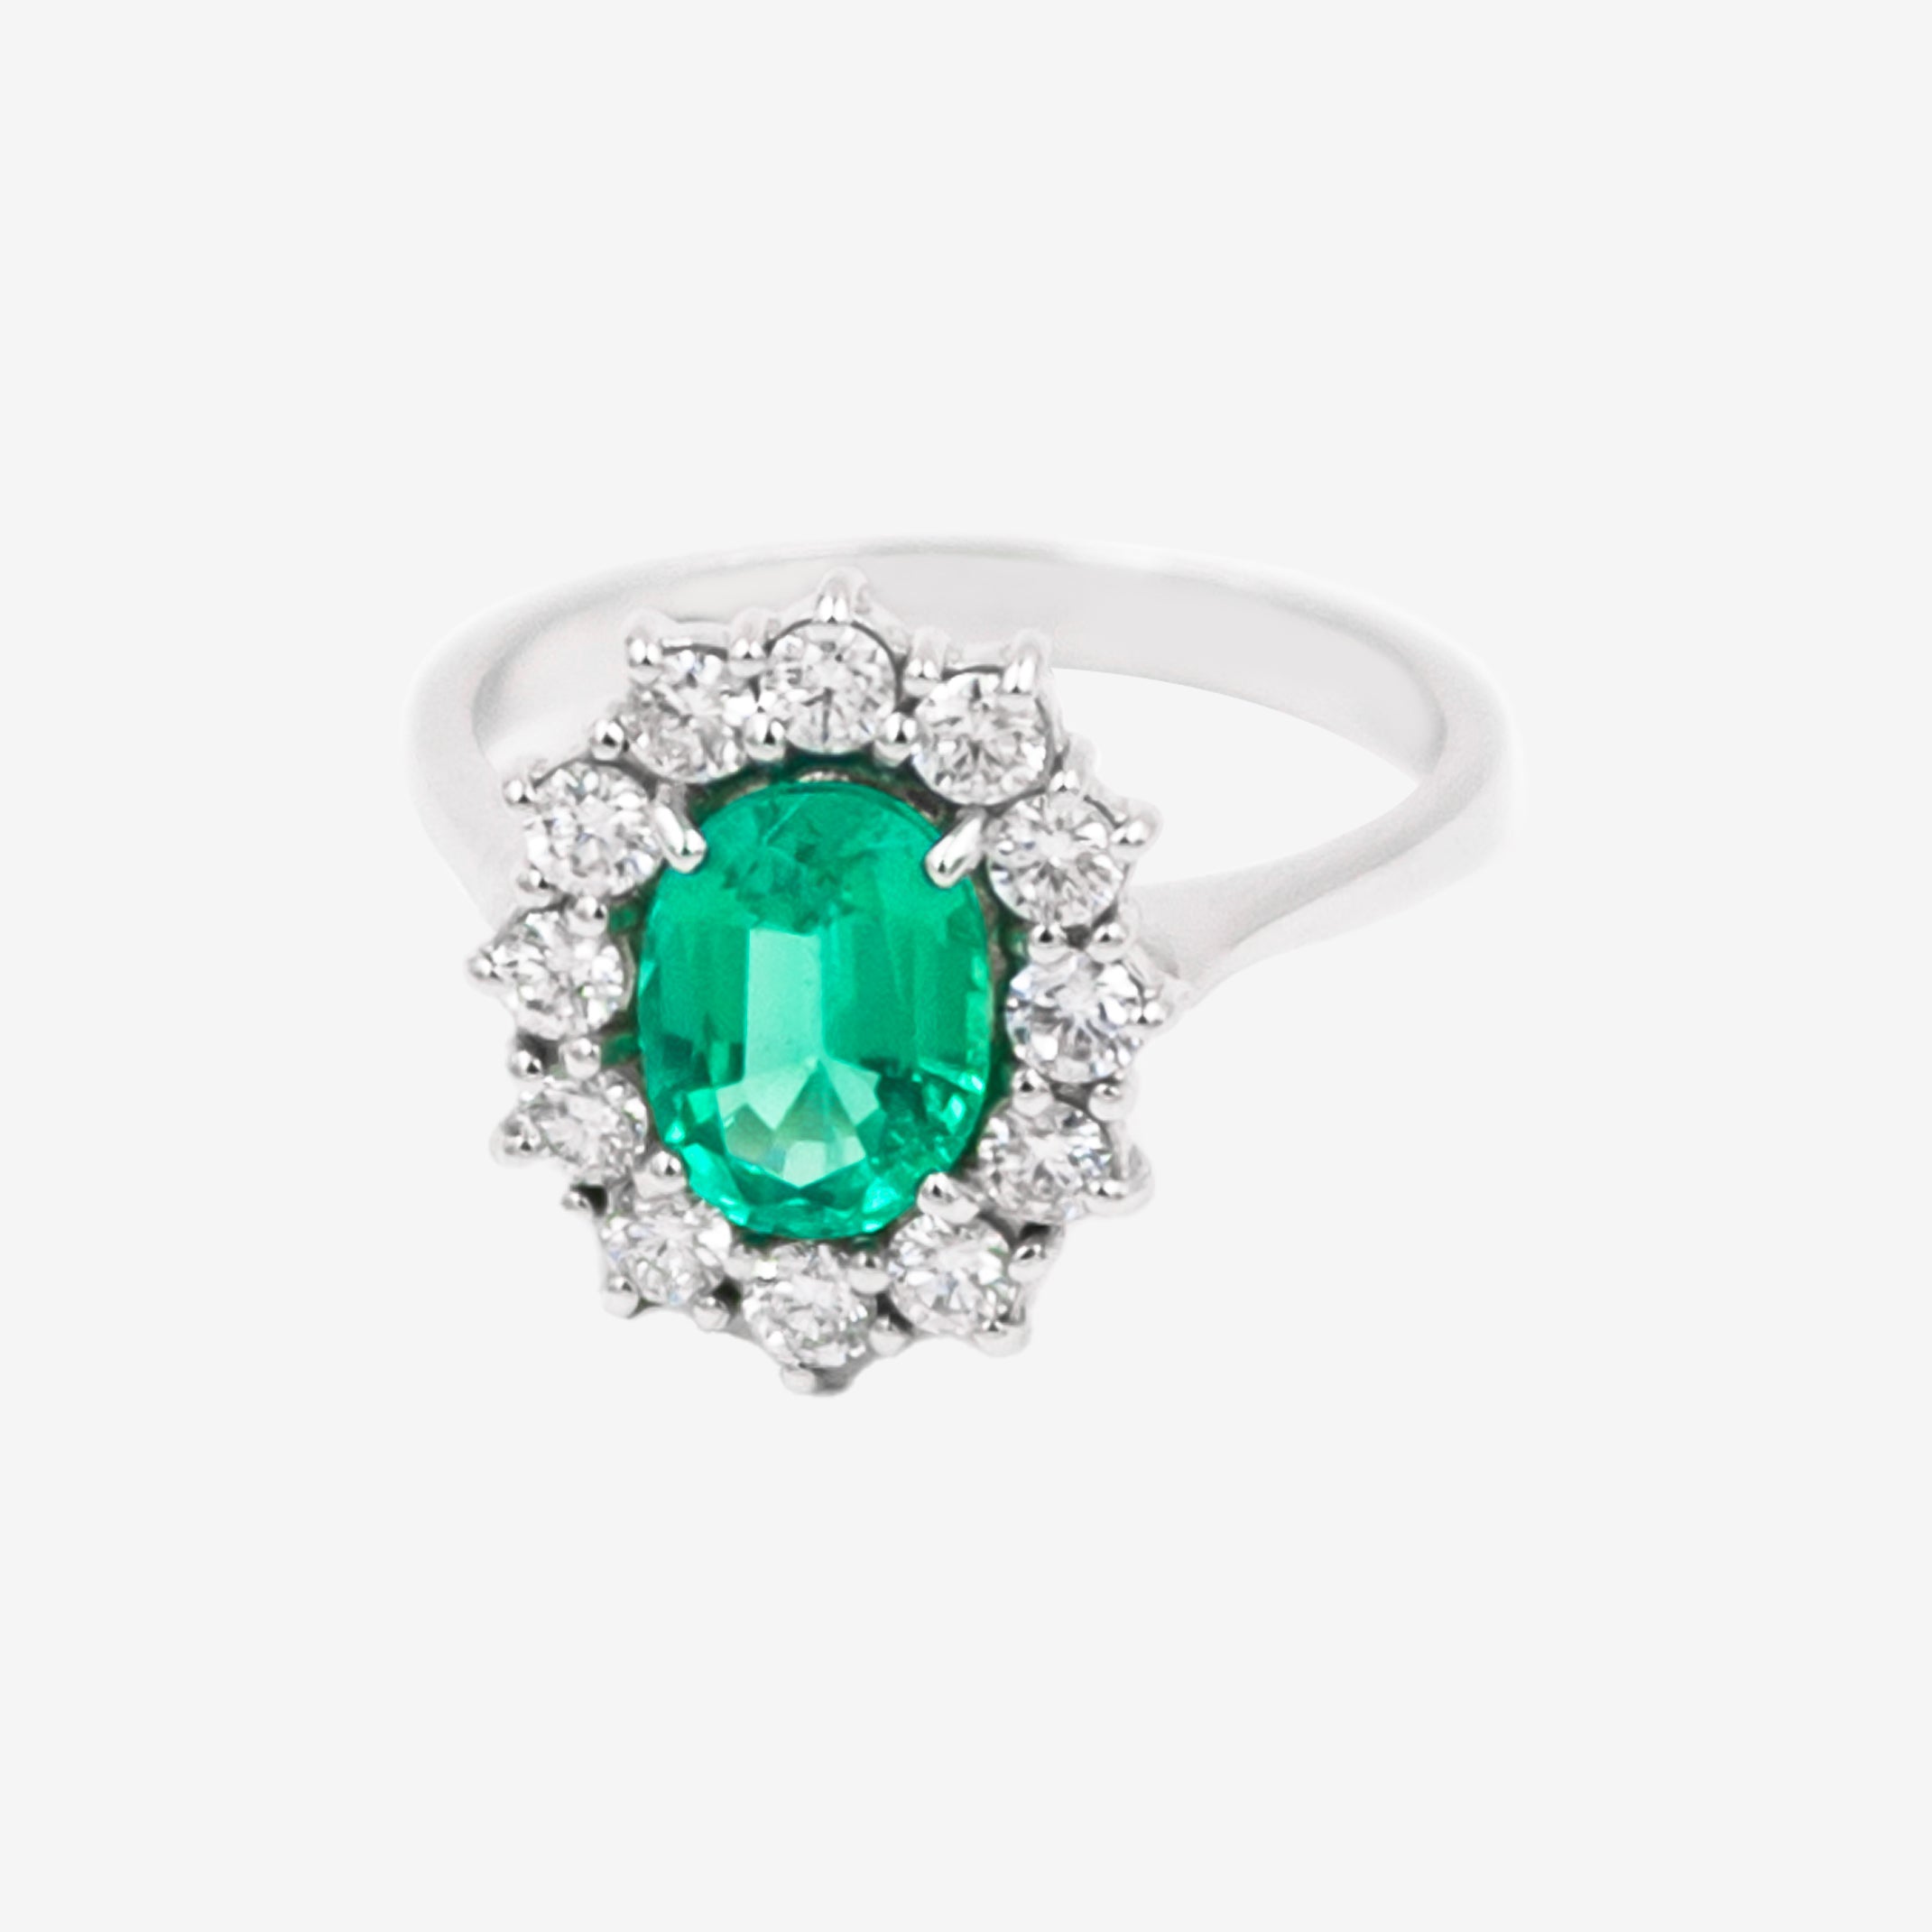 Emerald Flower ring with diamonds and emerald